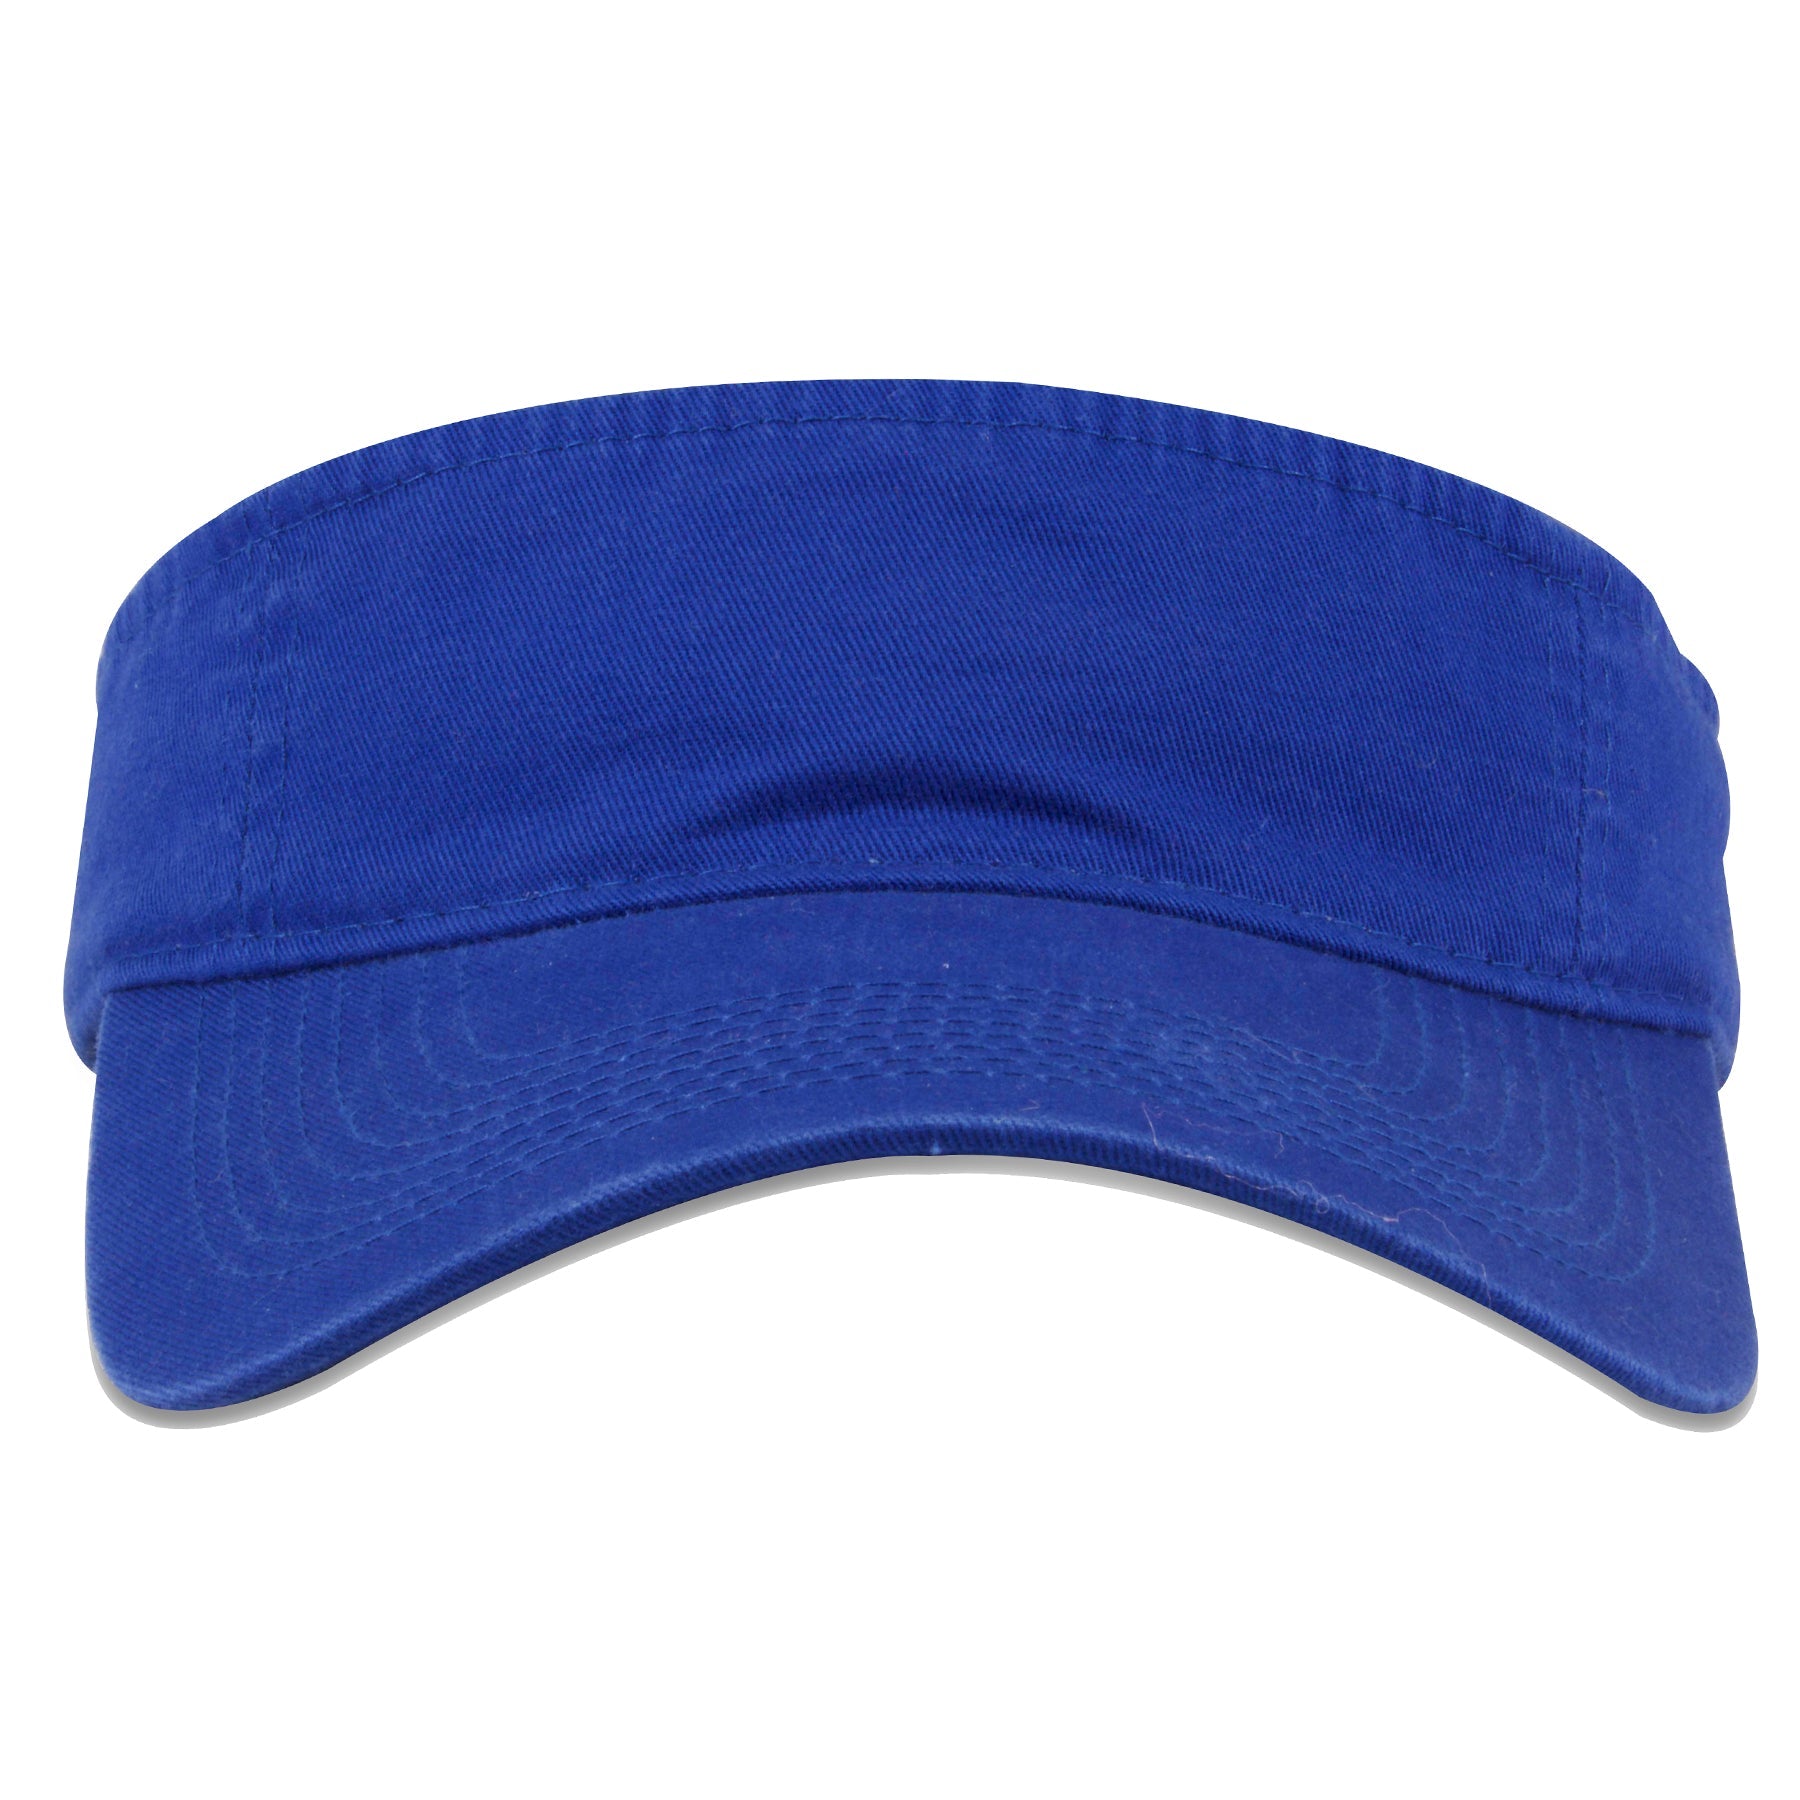 The blue visor is blank and features a curved brim